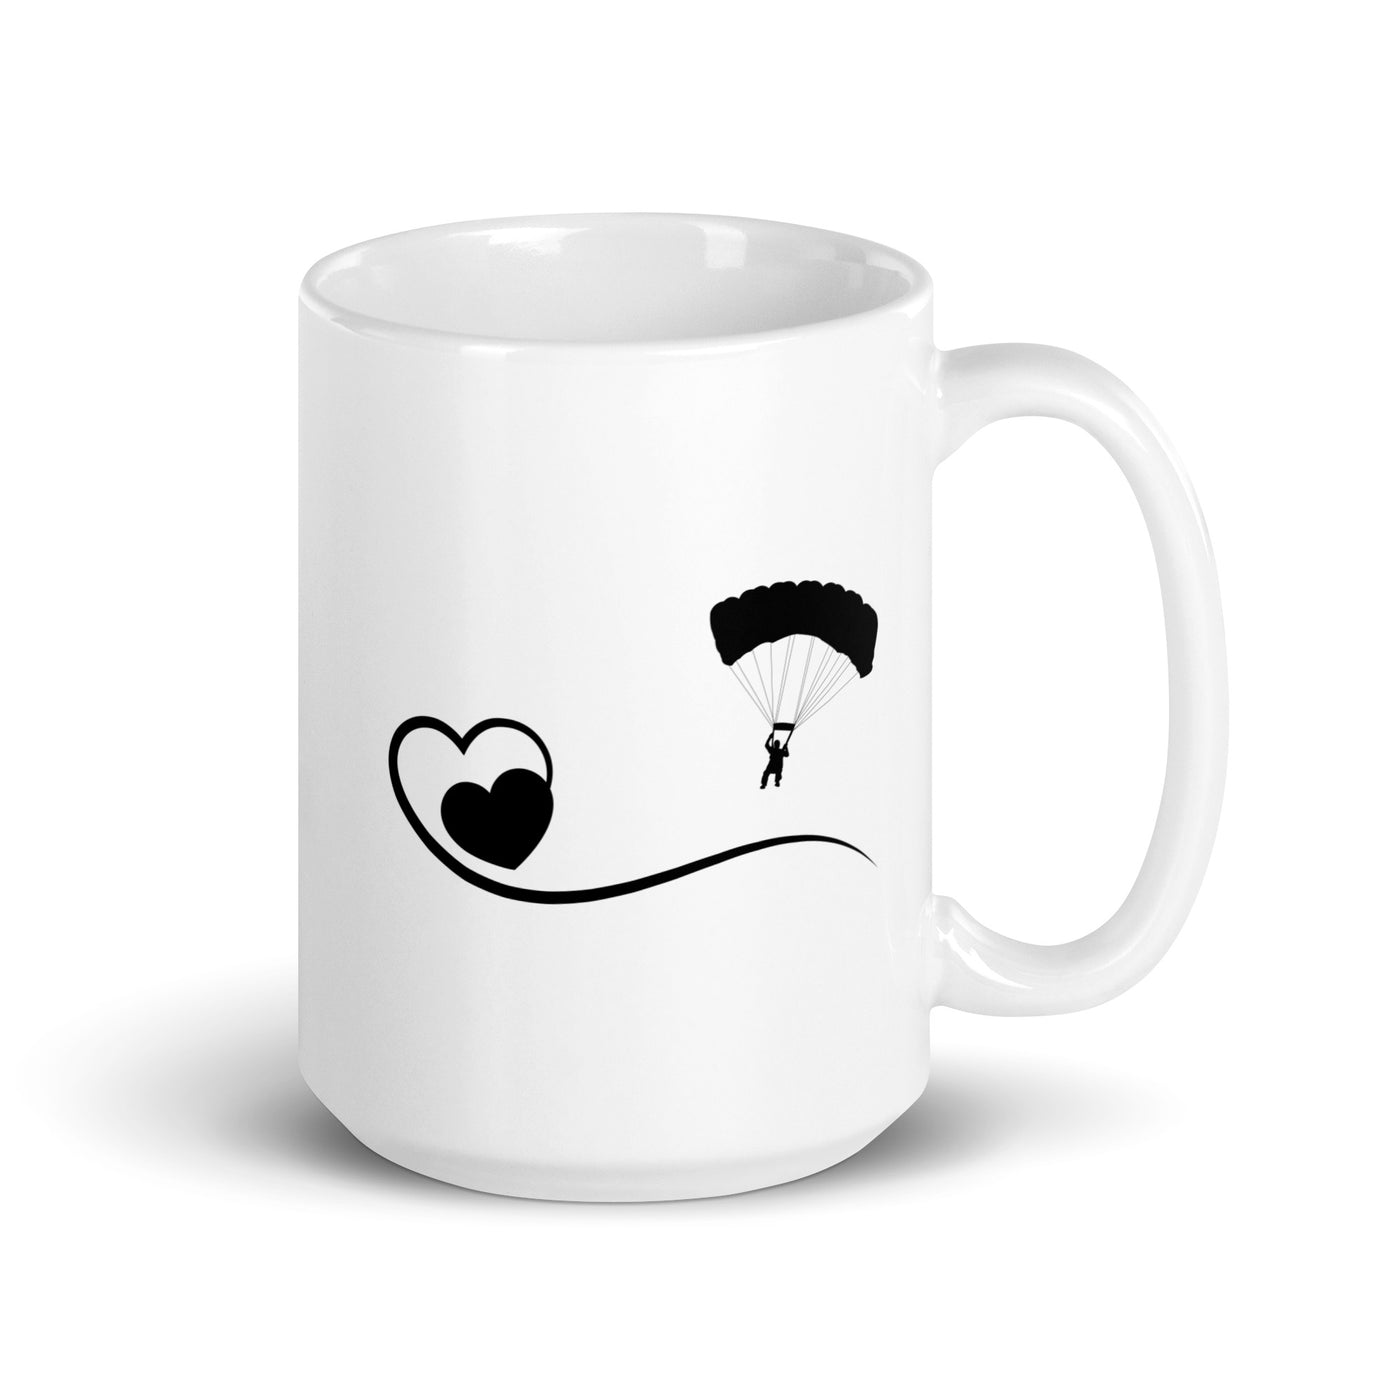 Heart And Paragliding - Tasse berge 15oz